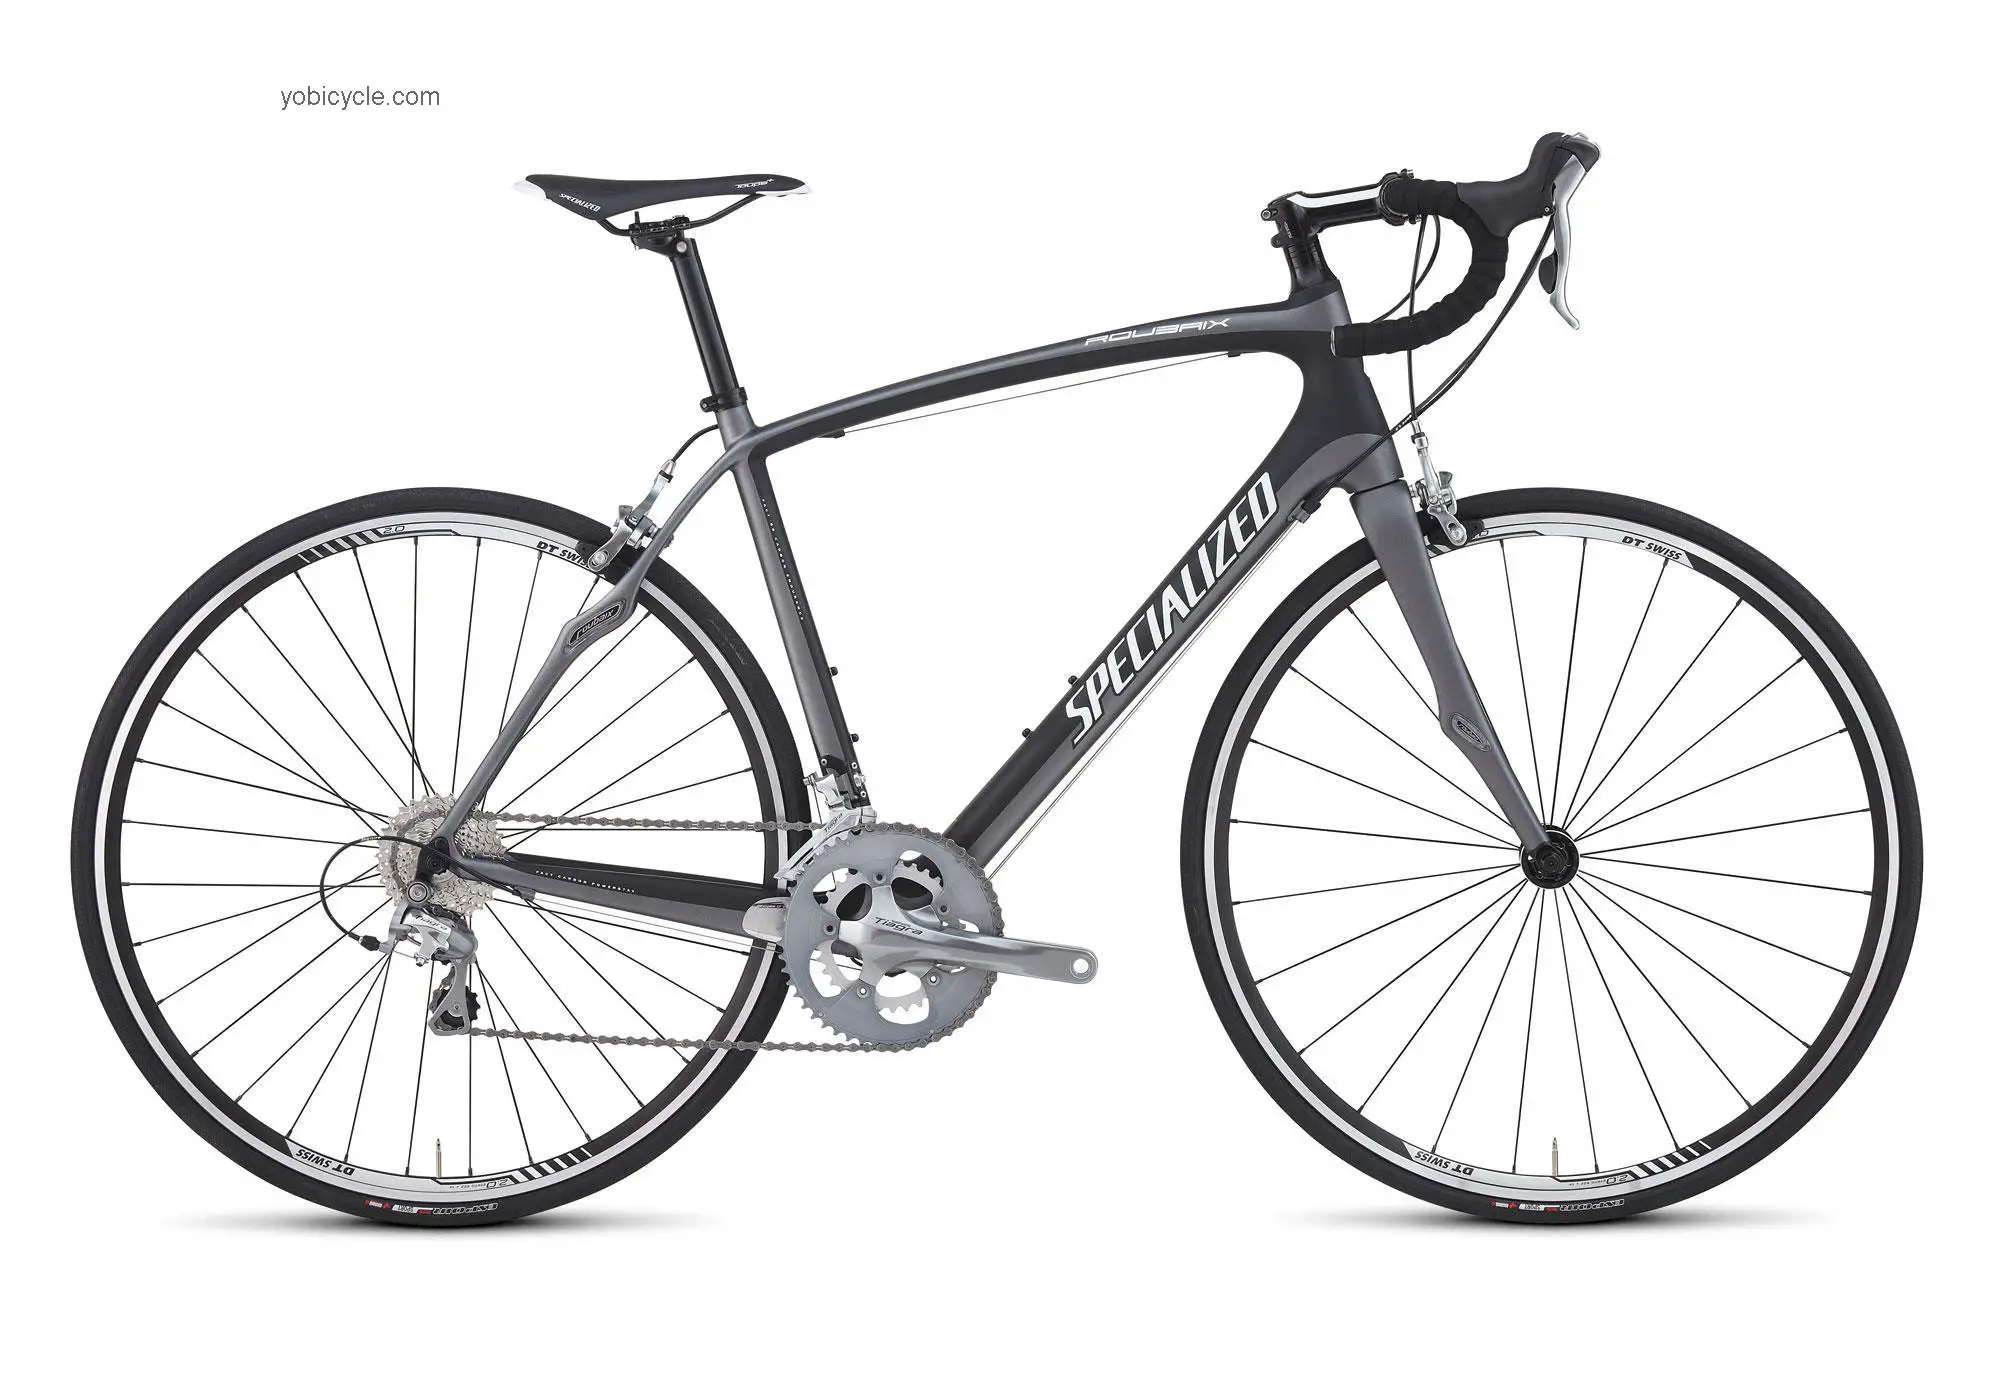 Specialized Roubaix Compact competitors and comparison tool online specs and performance